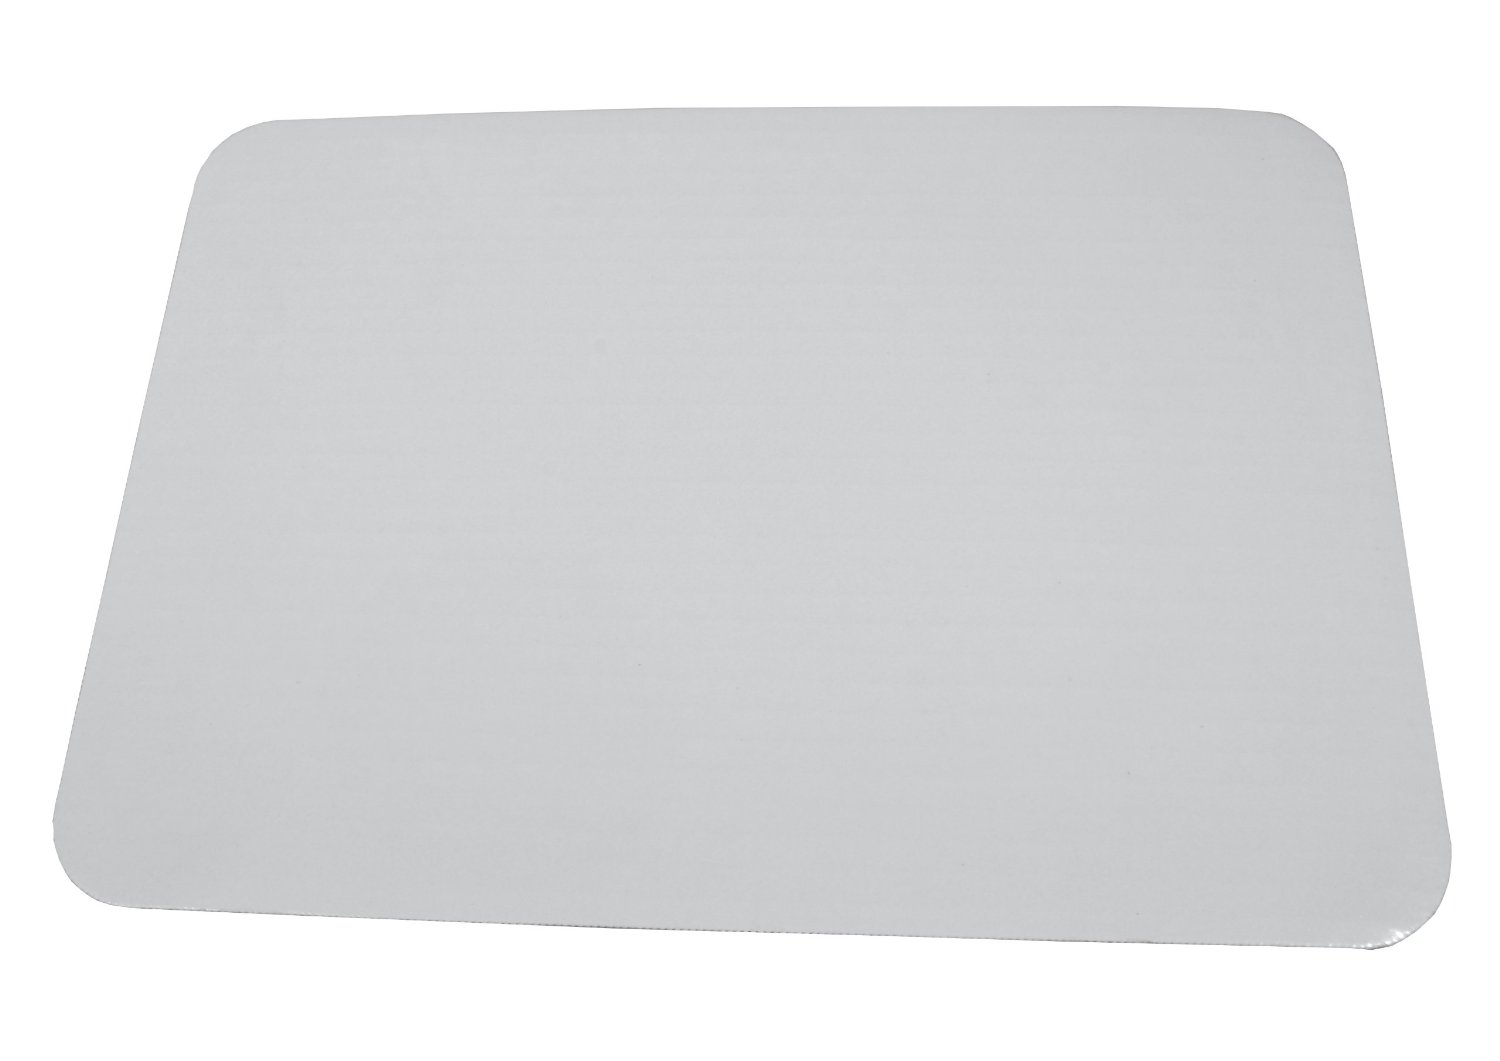 1153 White 19&quot;x14&quot; Corrugated
Coated Greaseproof 1/2 Sheet
Pad - 50